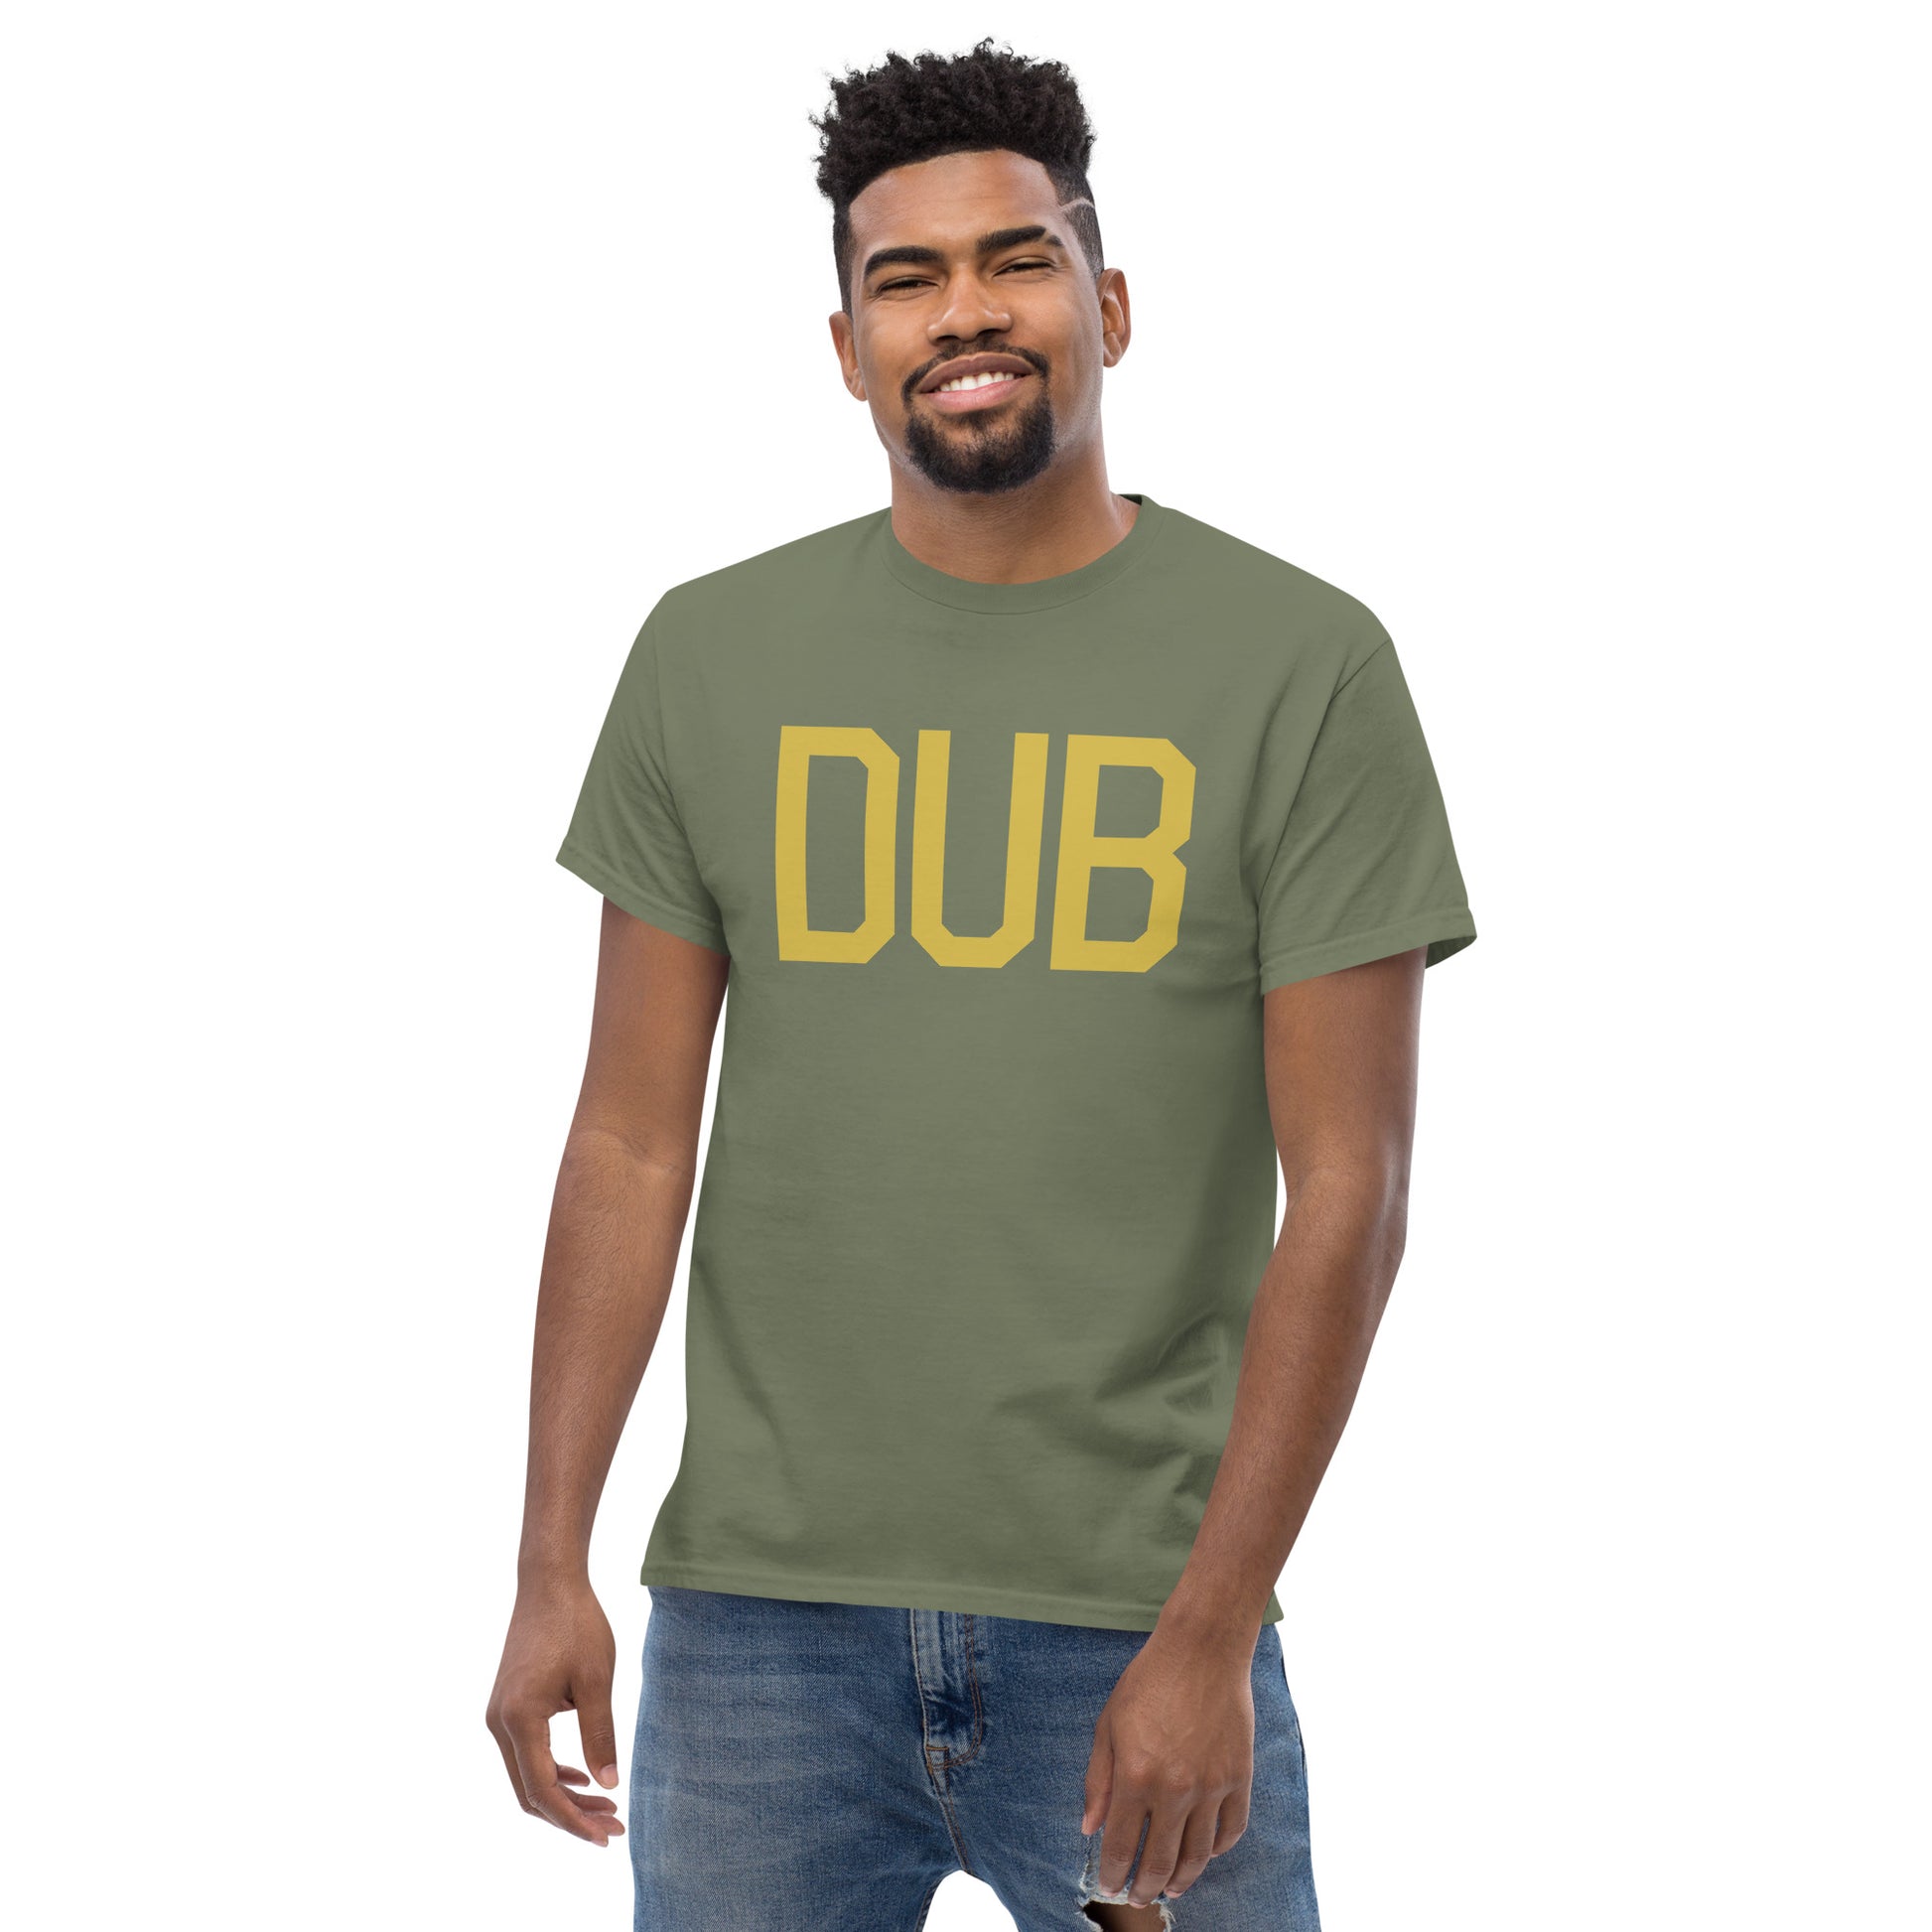 Aviation Enthusiast Men's Tee - Old Gold Graphic • DUB Dublin • YHM Designs - Image 06